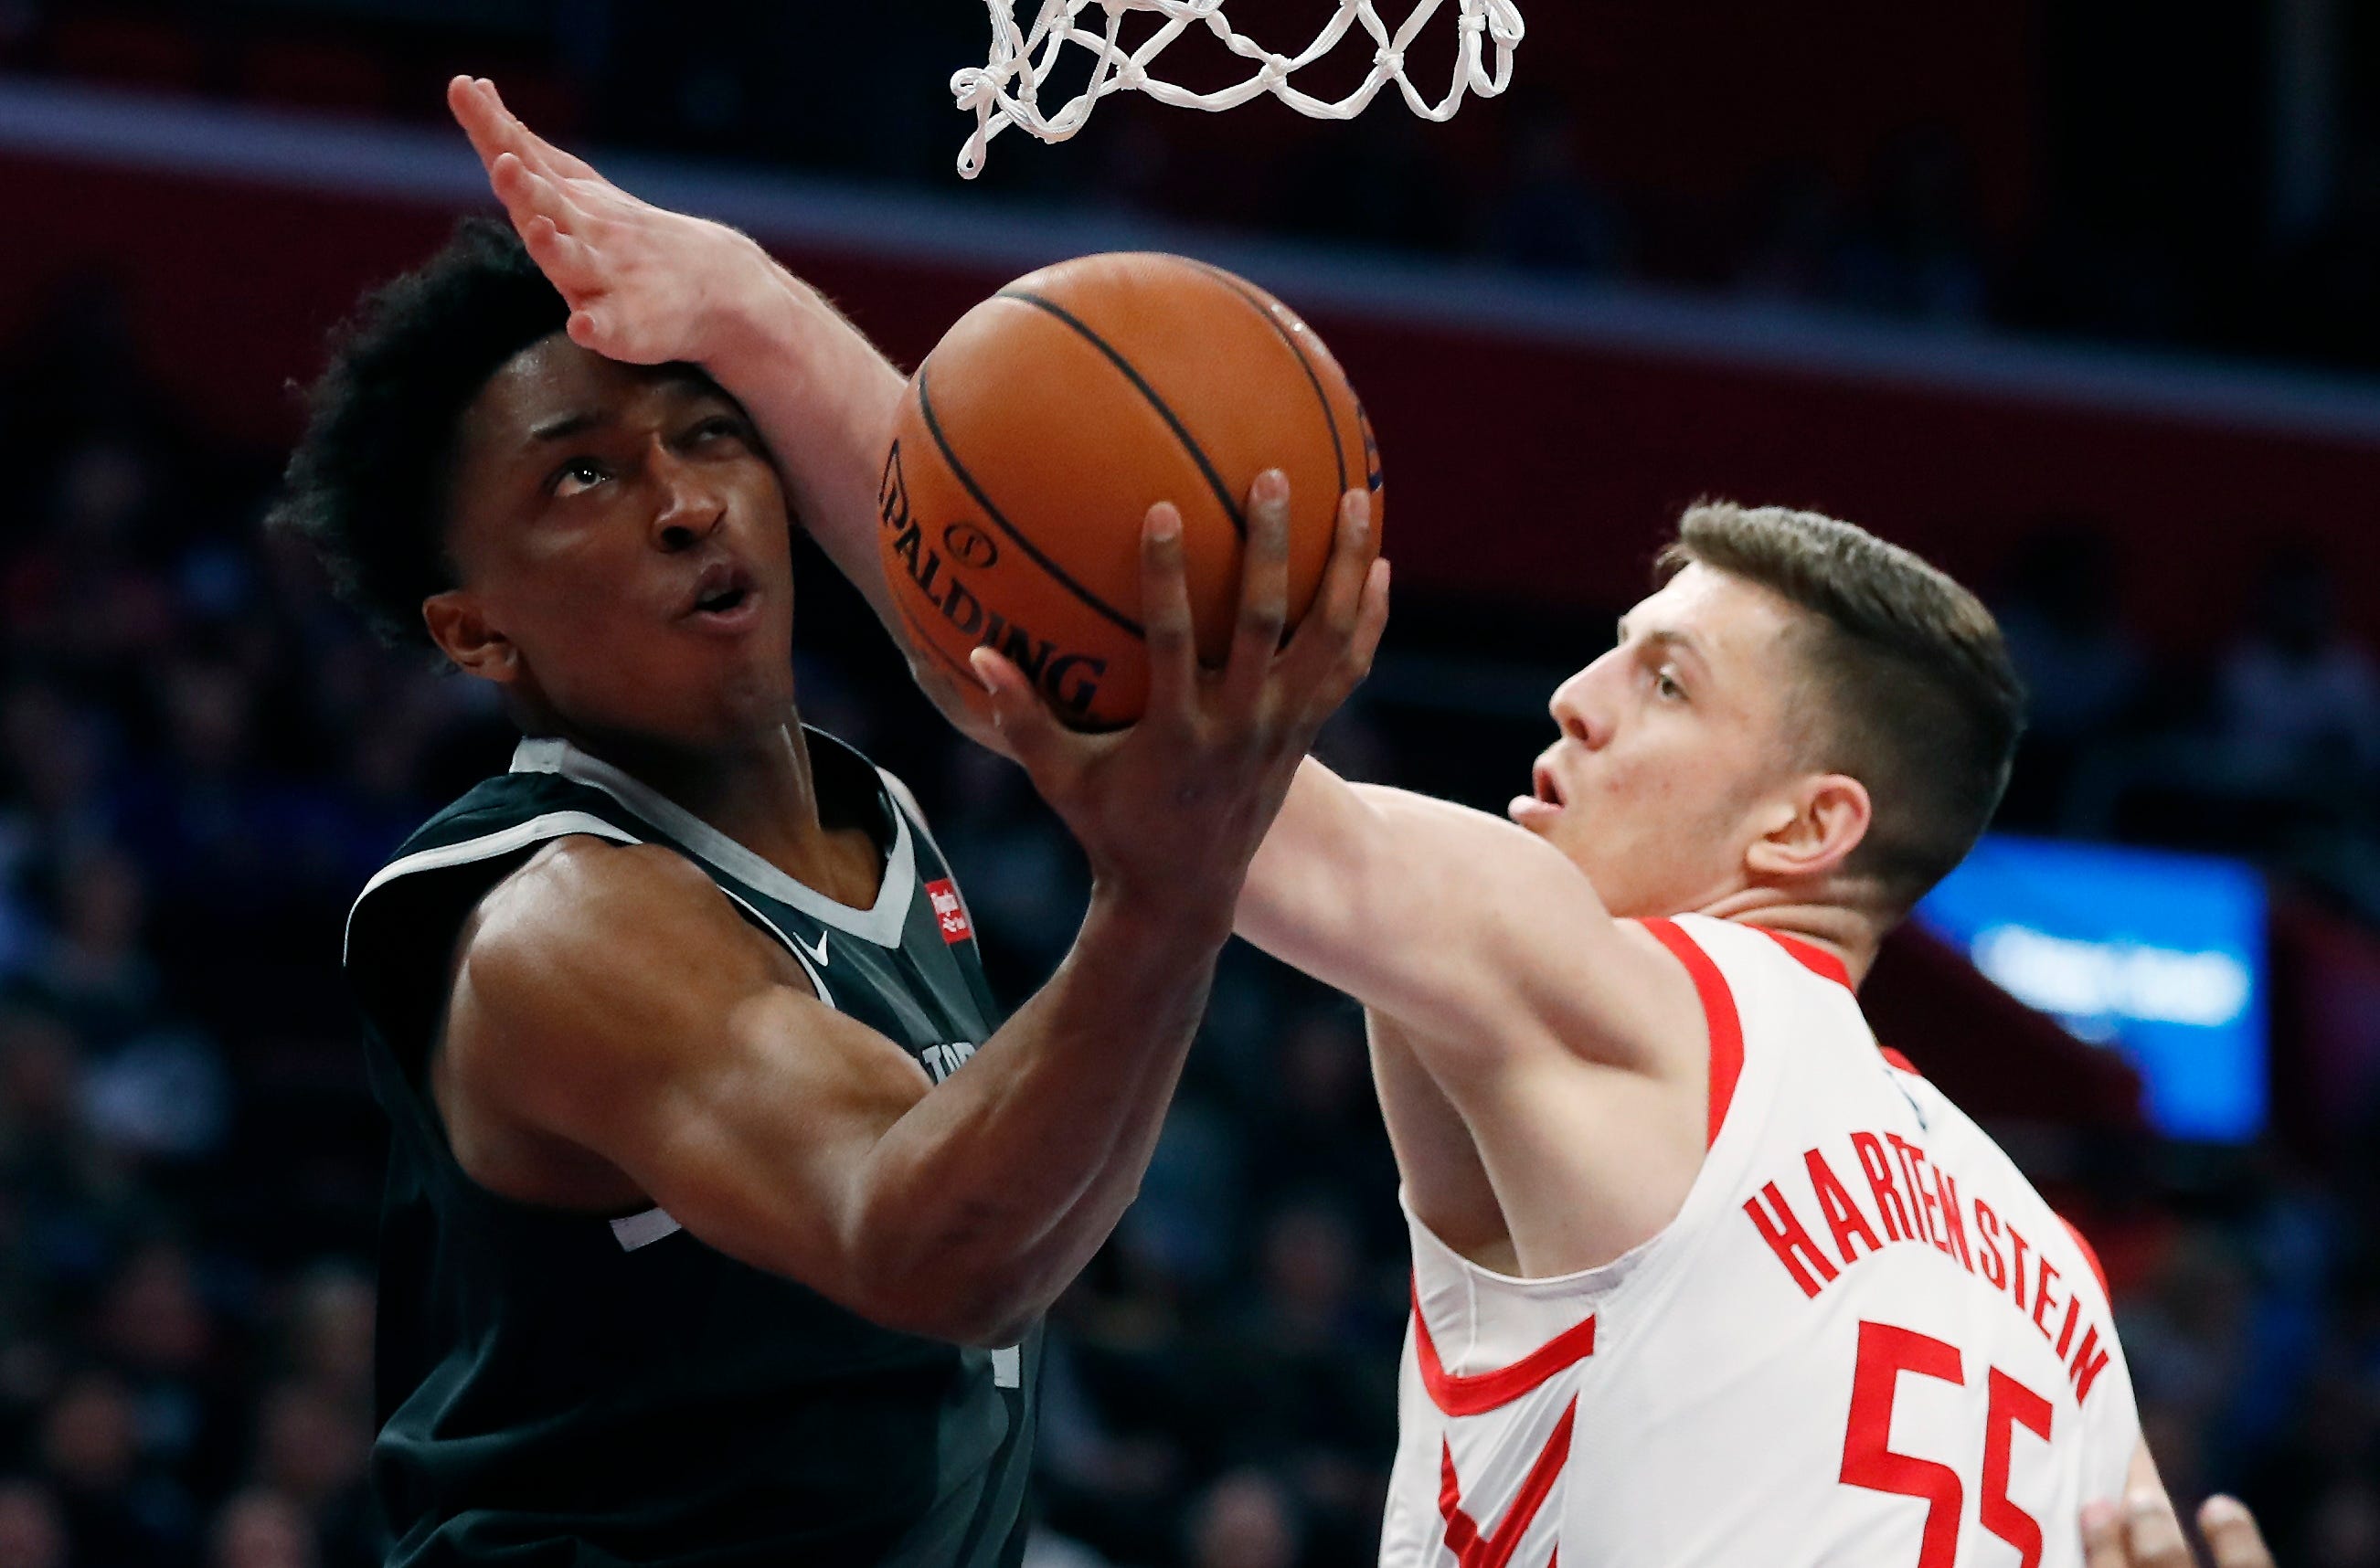 Pistons forward Stanley Johnson makes a layup as Houston Rockets forward Isaiah Hartenstein (55) defends during the first half.